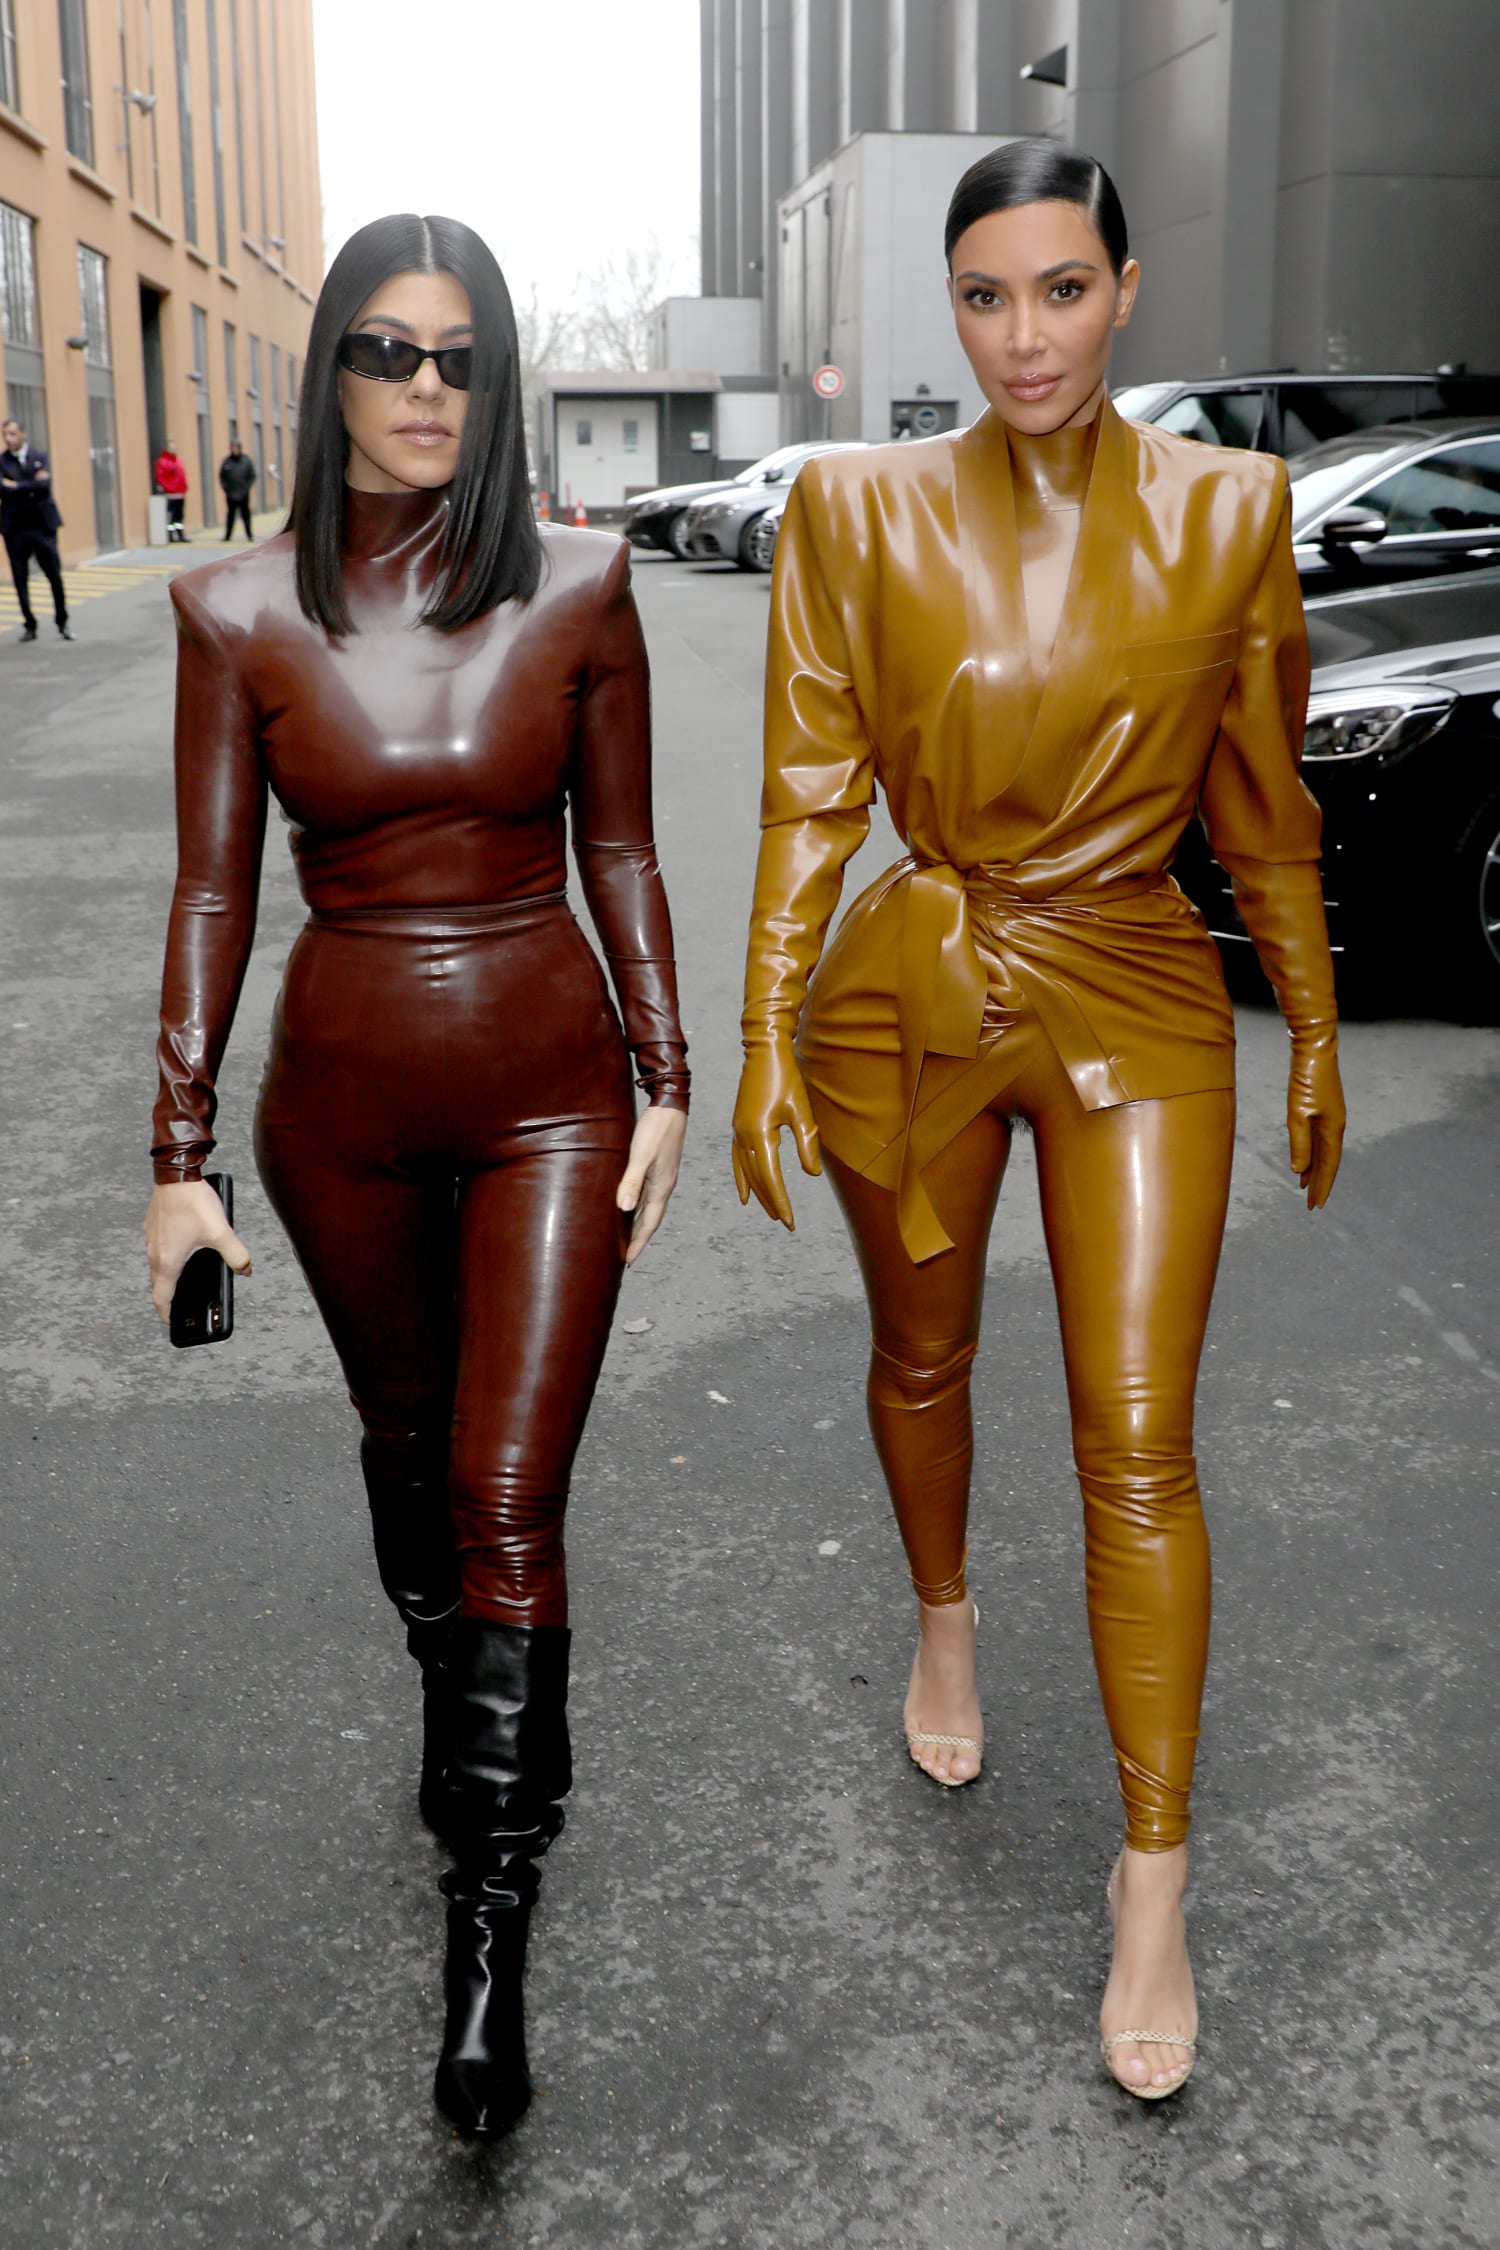 Kim Kardashian West and sister Kourtney step out in head-to-toe